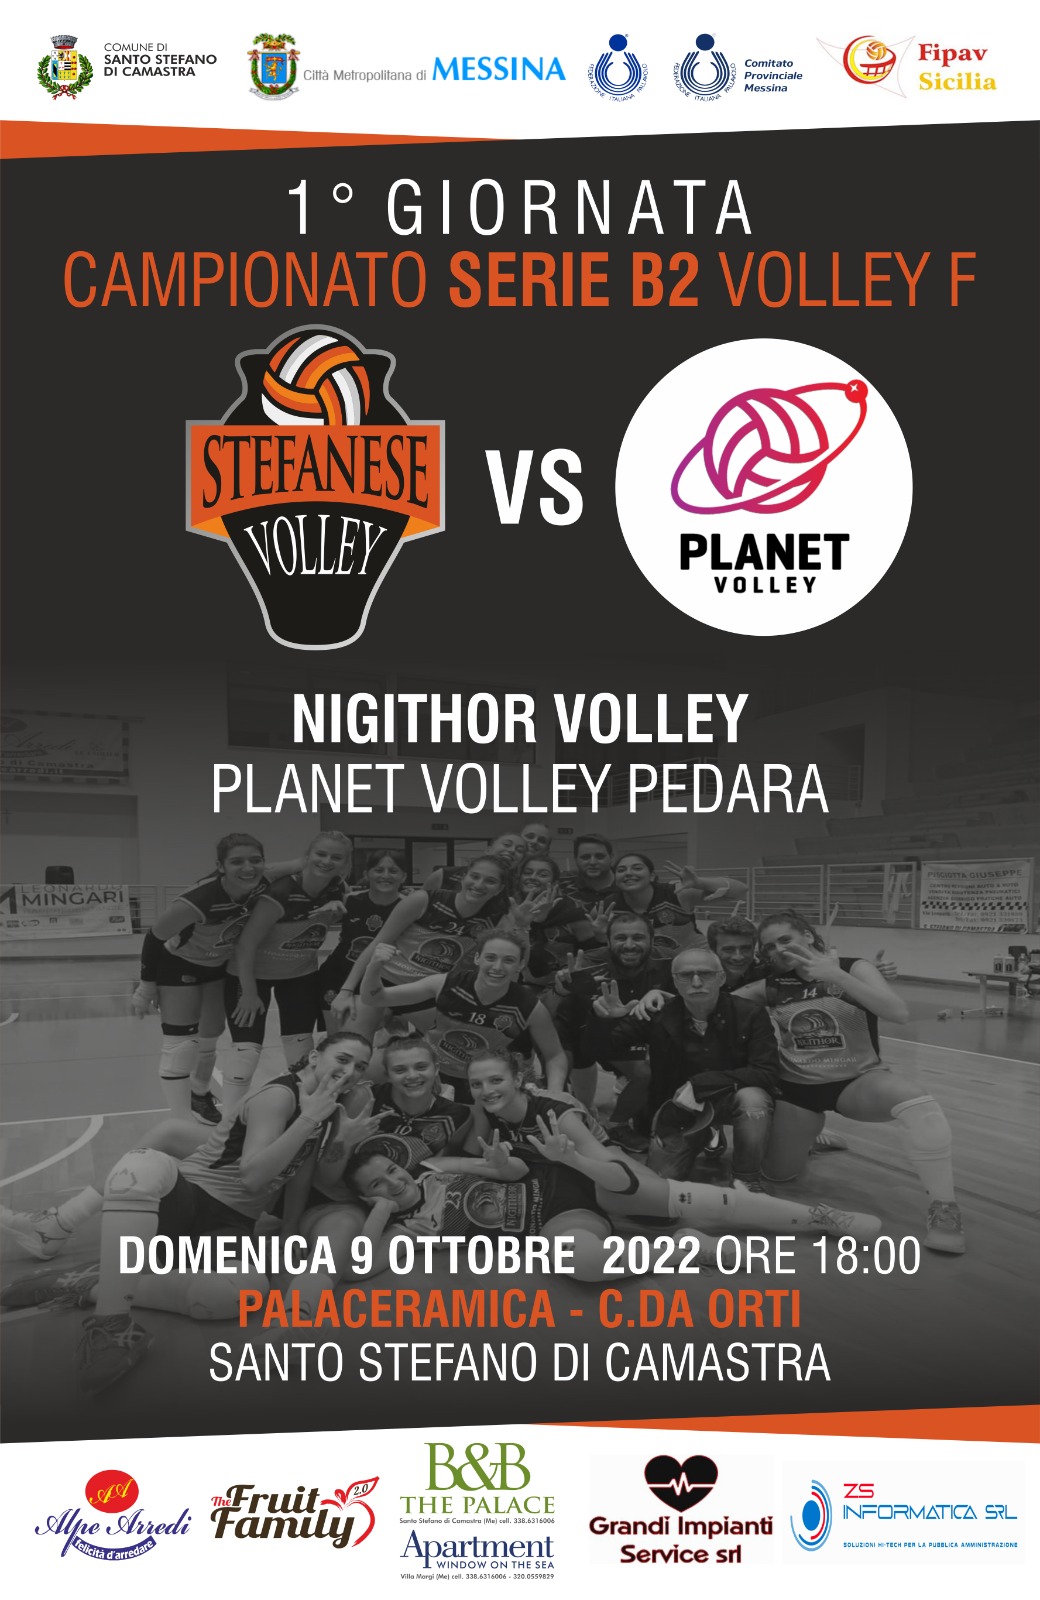 Stefanese vs Planet Volley